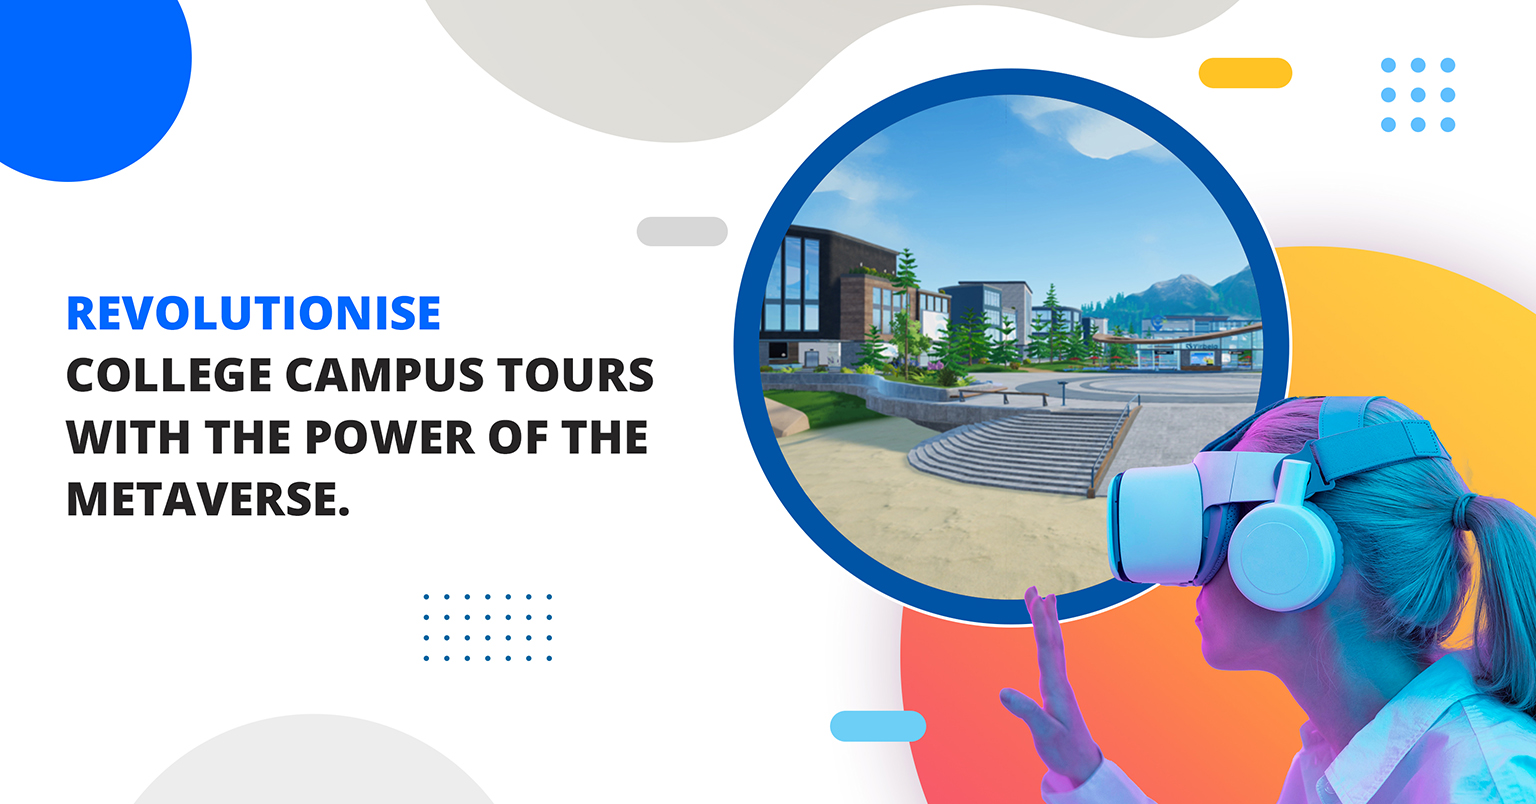 Revolutionise college campus tours with the power of
								the Metaverse